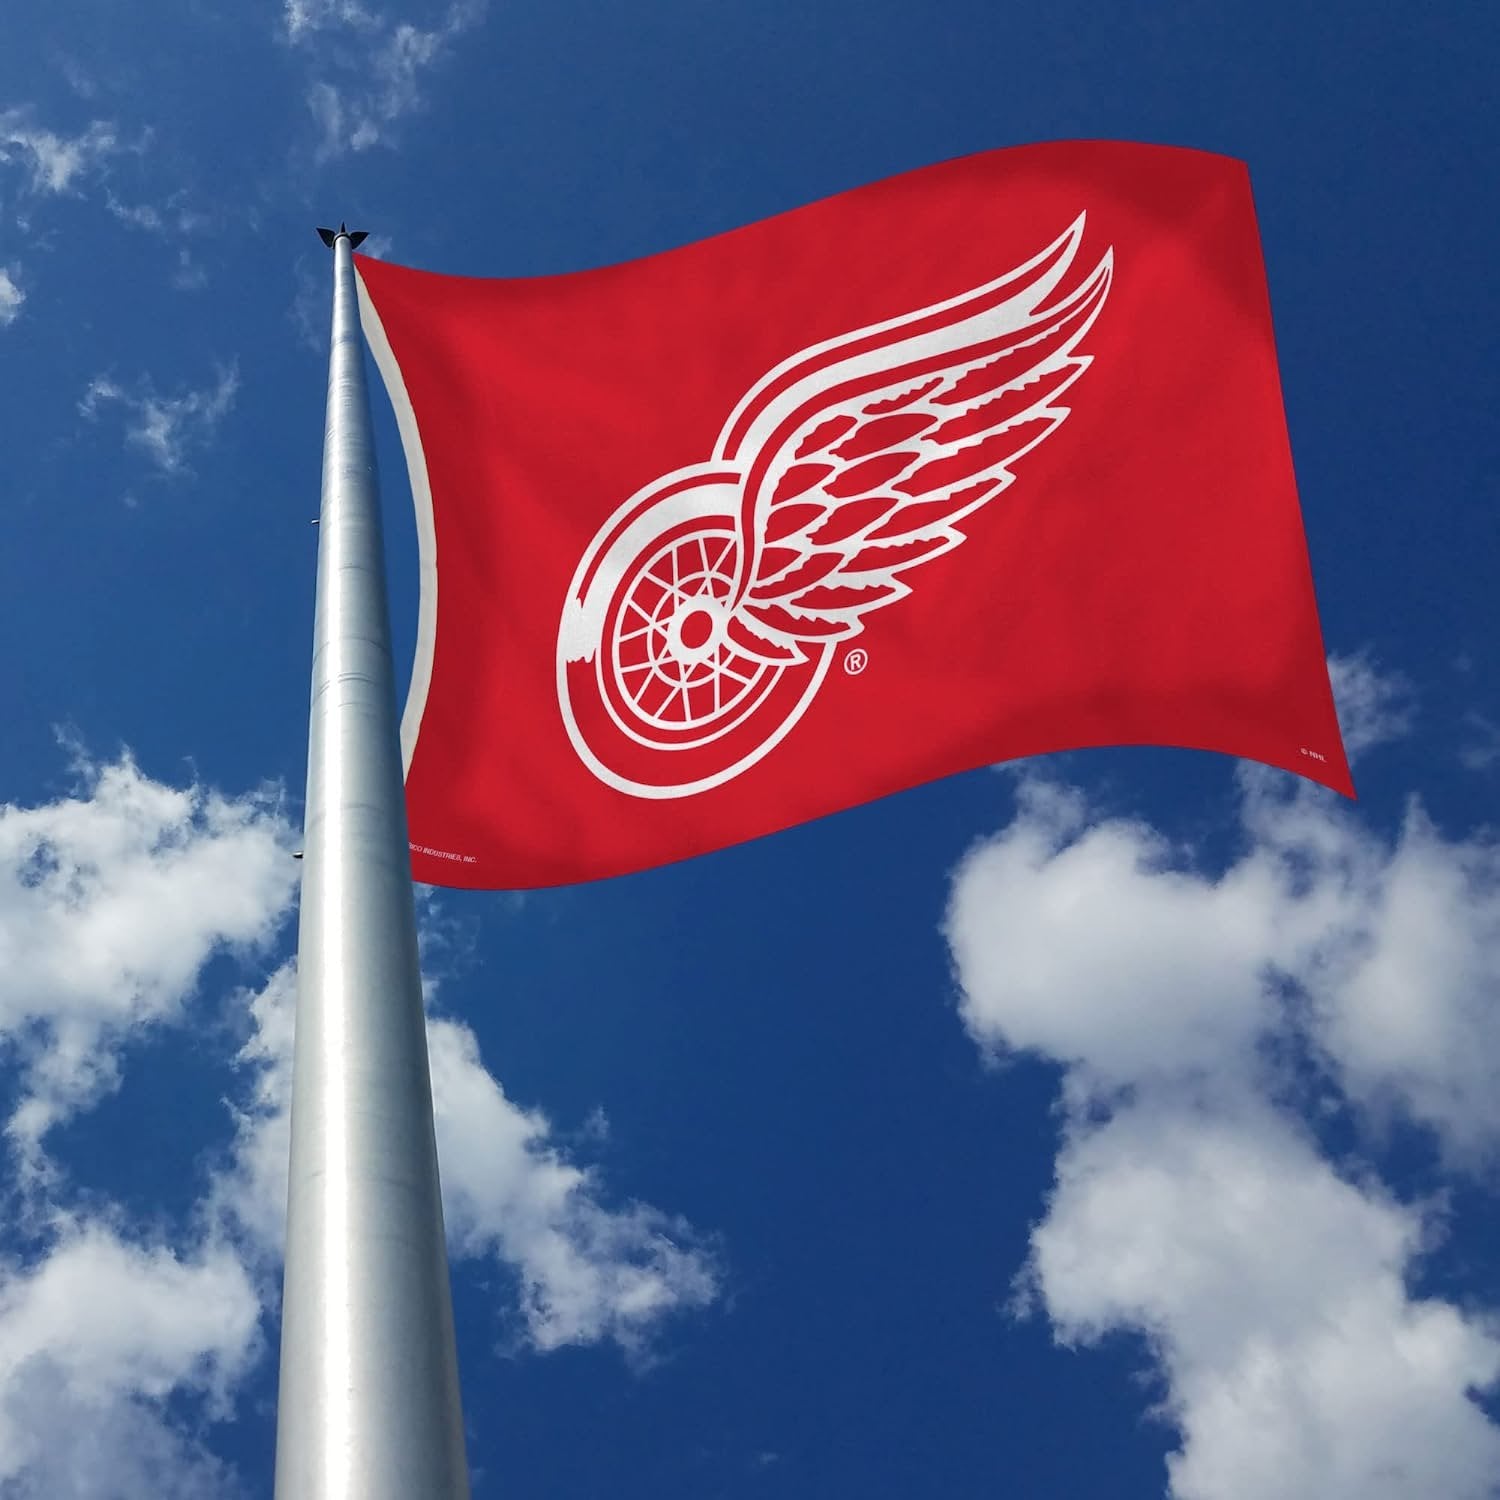 Detroit Red Wings 3x5 Feet Premium Flag Banner with Metal Grommets Outdoor